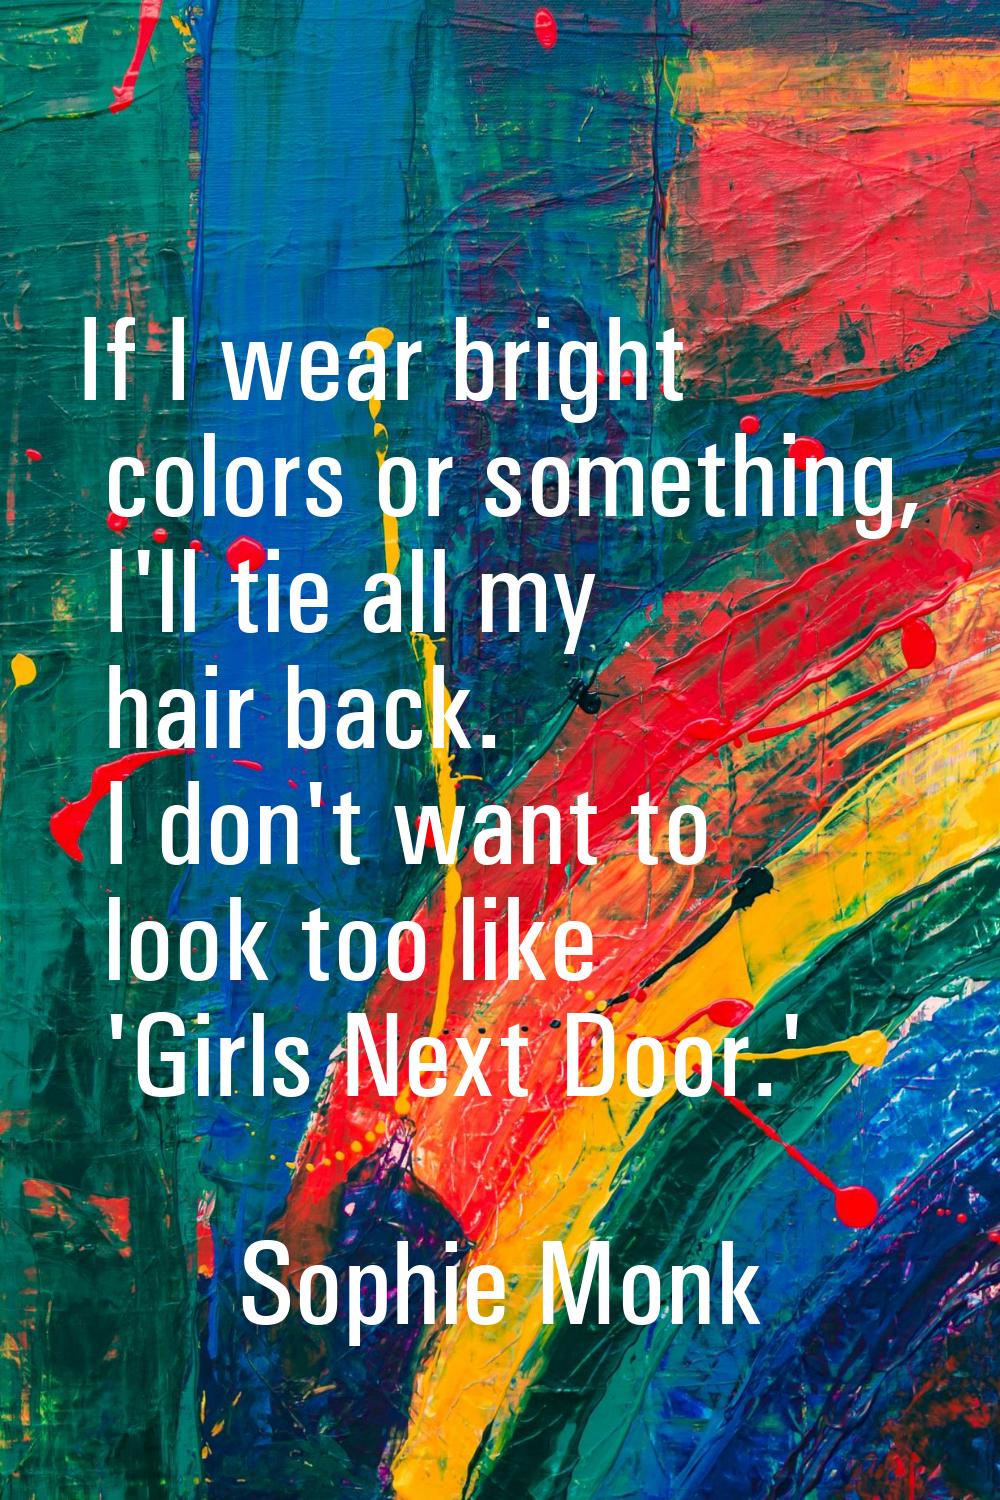 If I wear bright colors or something, I'll tie all my hair back. I don't want to look too like 'Gir